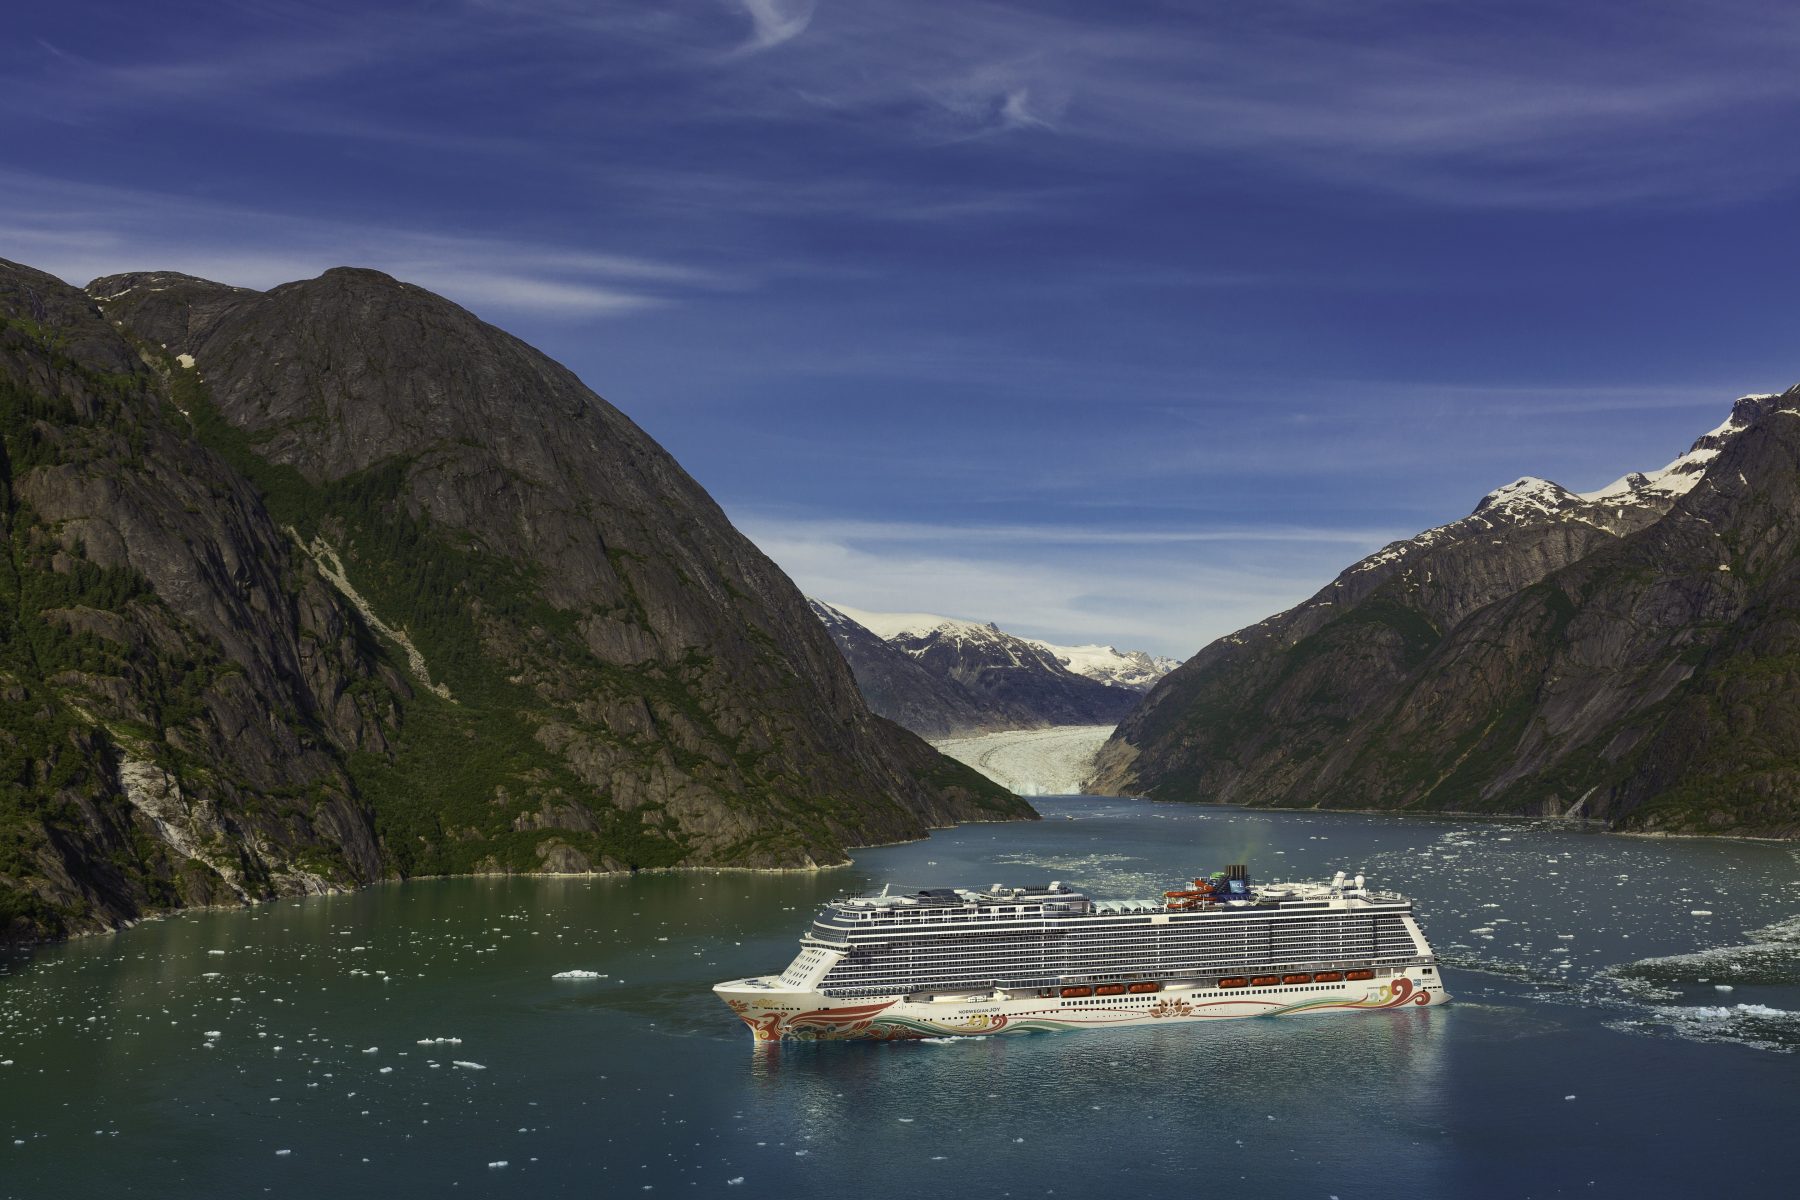 NCL to explore Alaska with its youngest fleet in 2020